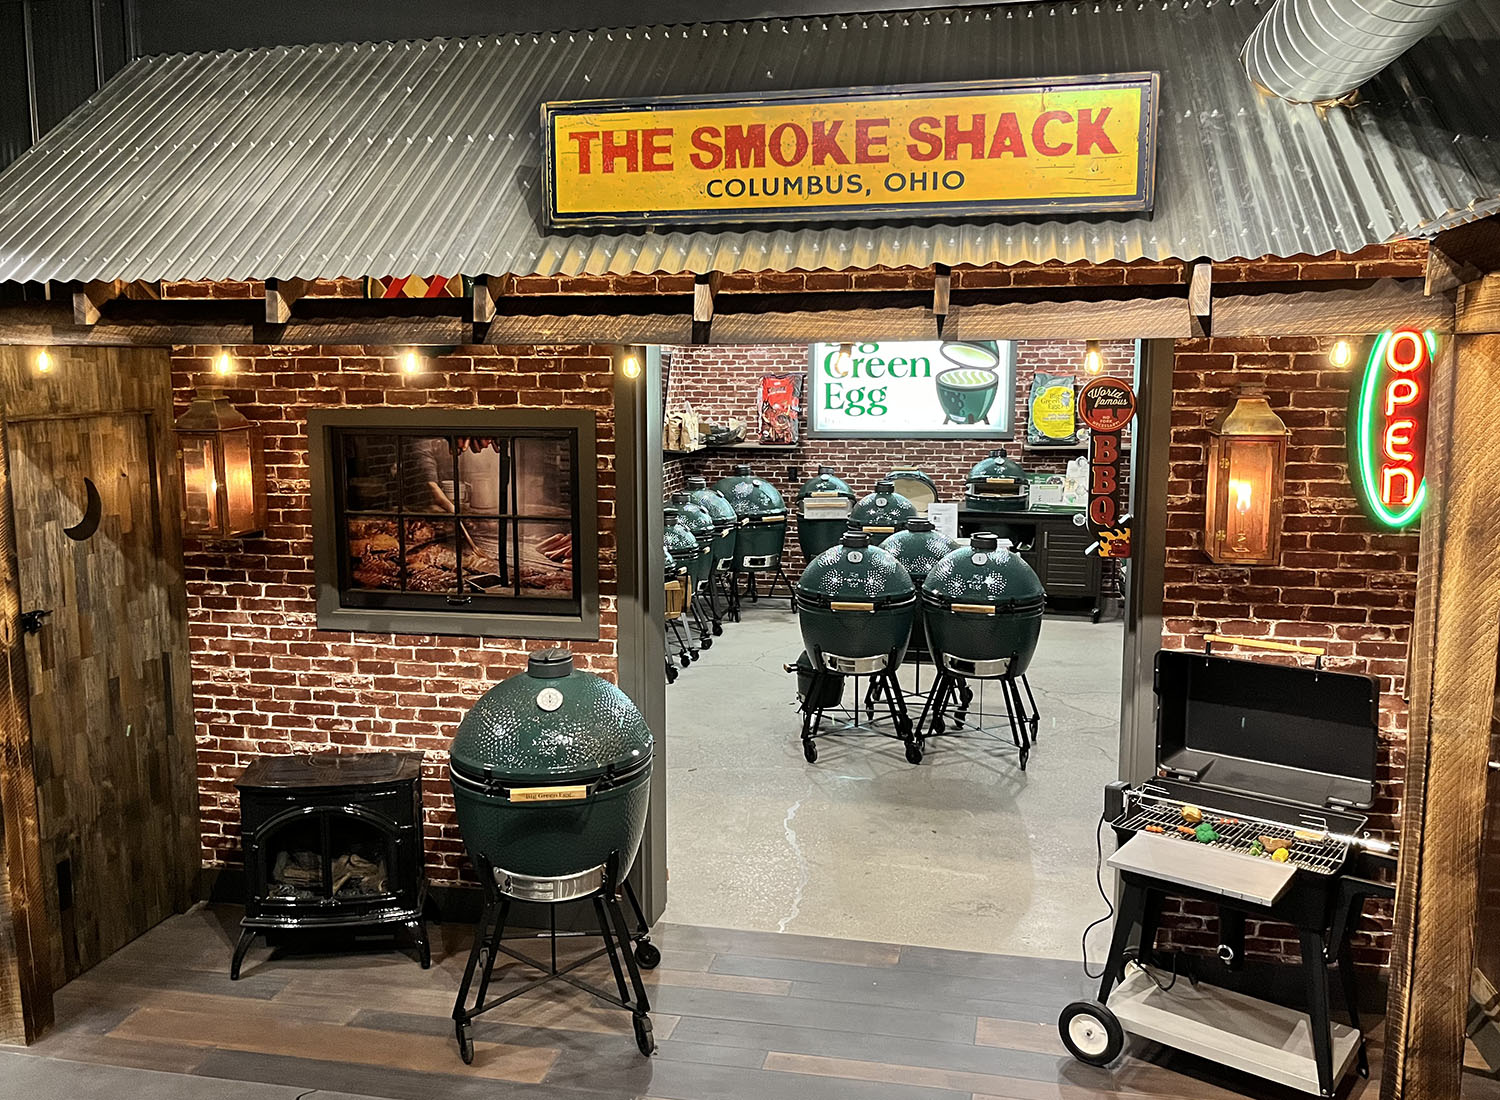 SMOKE SHACK SPECIALTY GAS HOUSE IN COLUMBUS BBQ GRILLS AND ACCESSORIES BIG GREEN EGG EGGCESSORIES